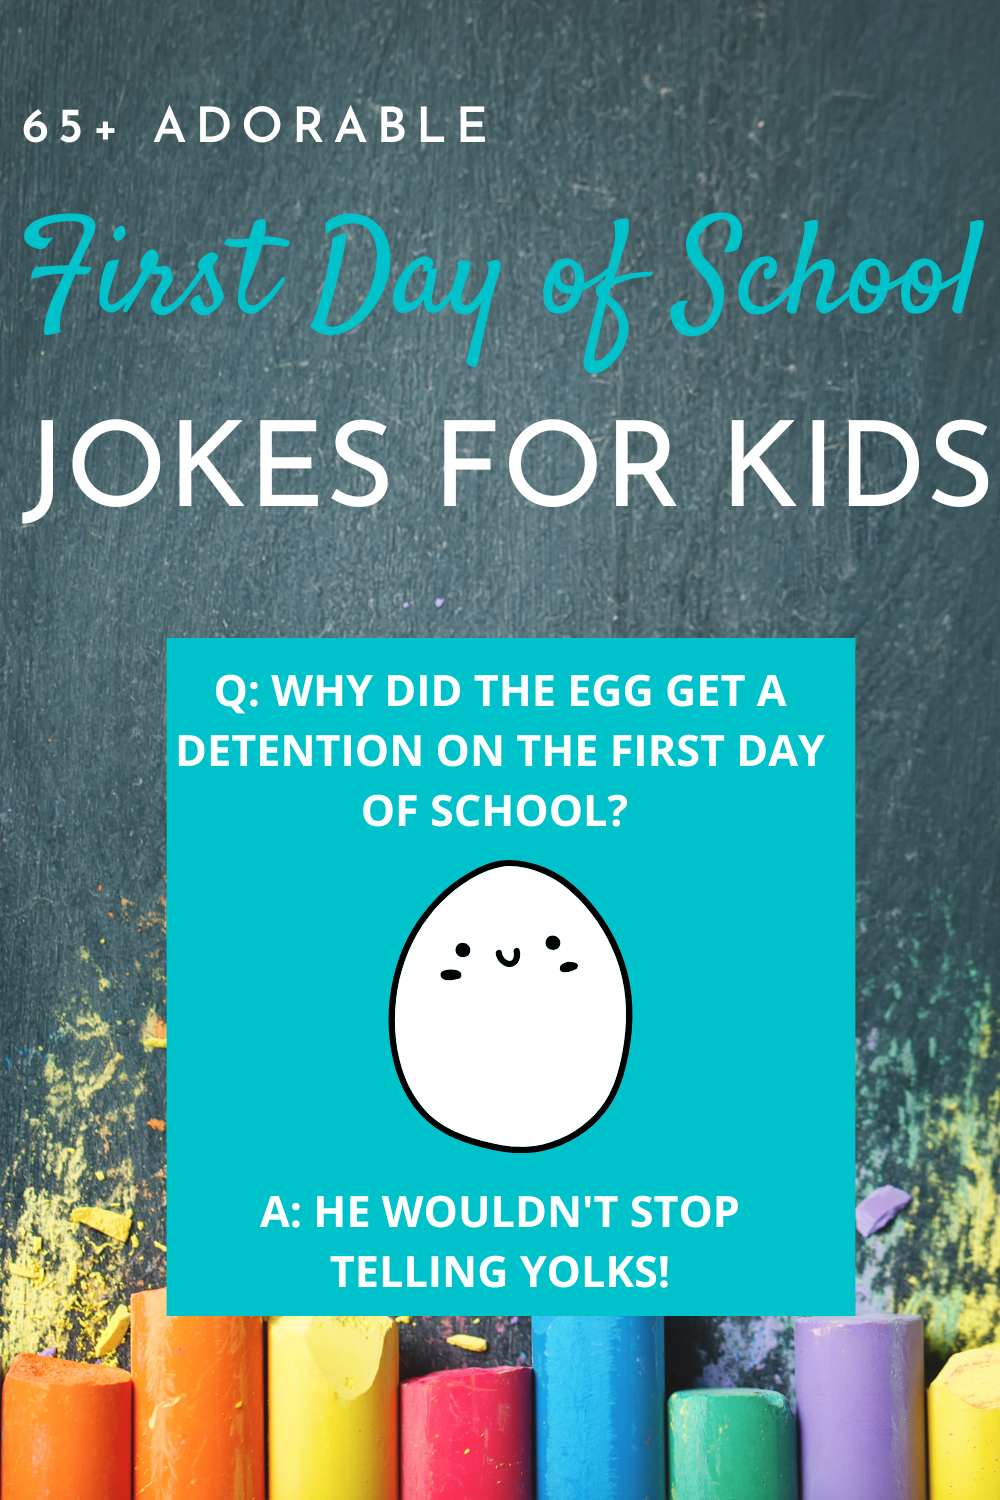 65+ First Day of School Jokes Your Kids Will Love